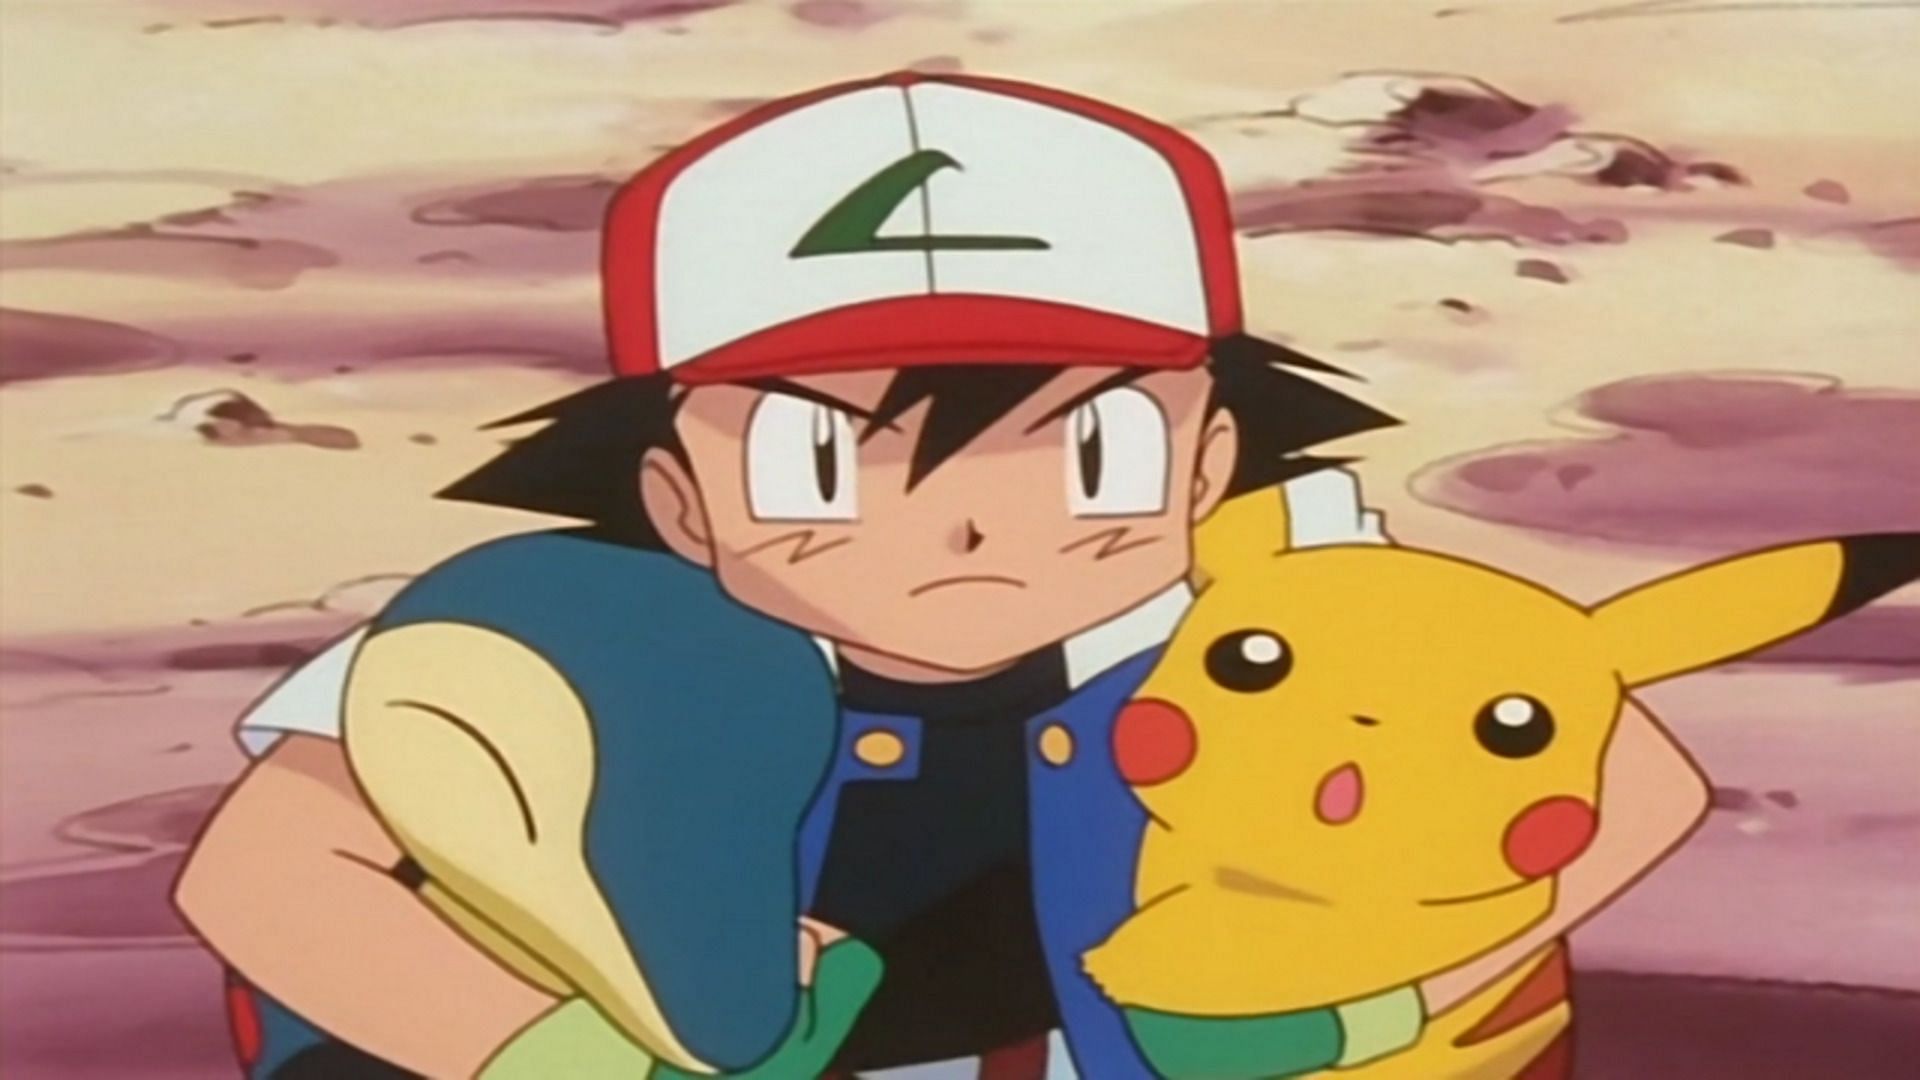 This episode hosted Ash catching his Cyndaquil (Image via The Pokemon Company)